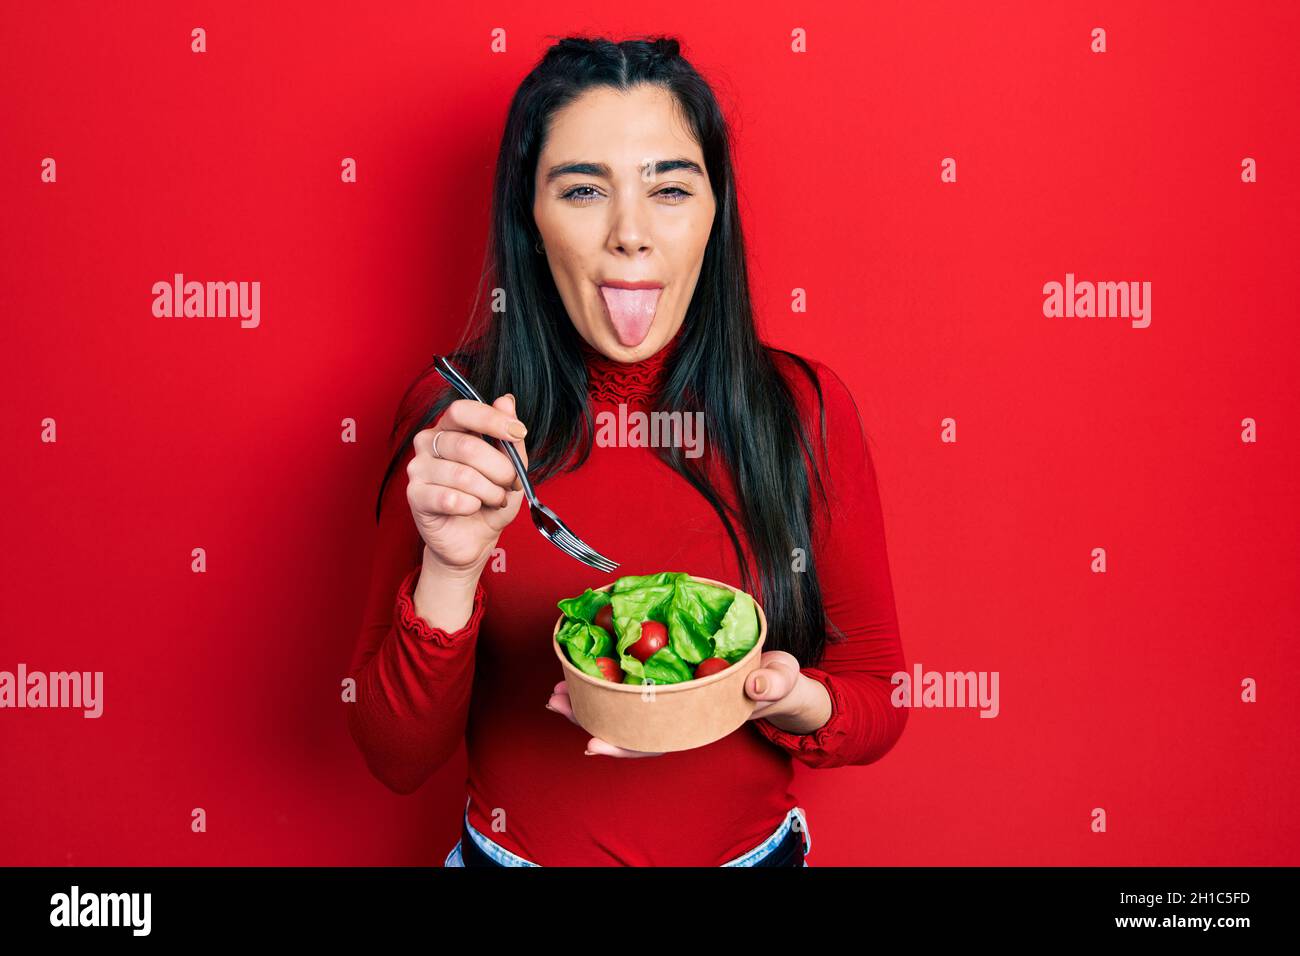 Young hispanic girl eating salad sticking tongue out happy with funny expression. Stock Photo